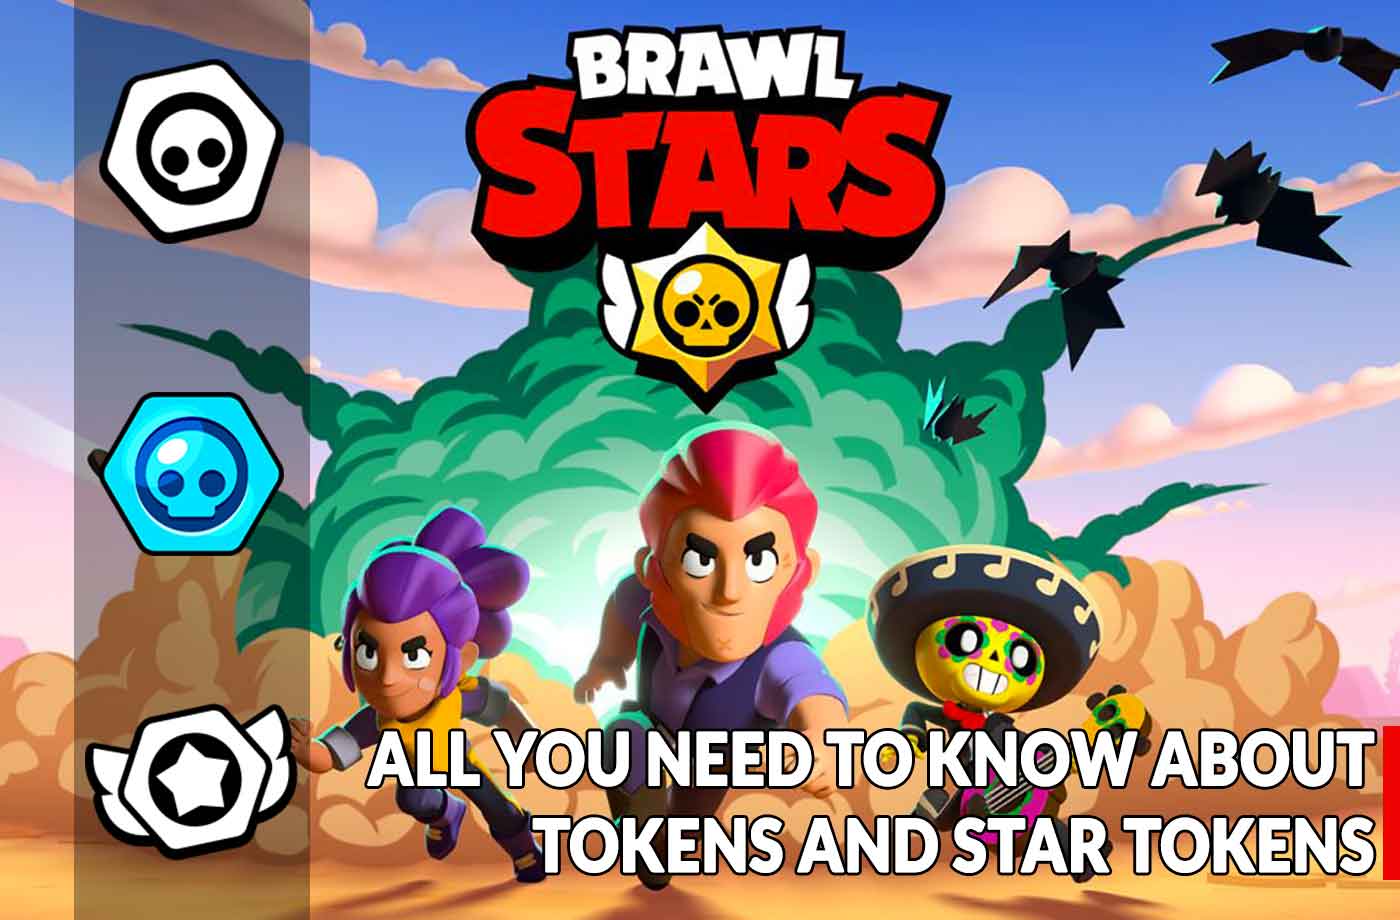 Guide Brawl Stars How To Quickly Gain Tokens And Star Tokens Kill The Game - brawl stars manette xbox